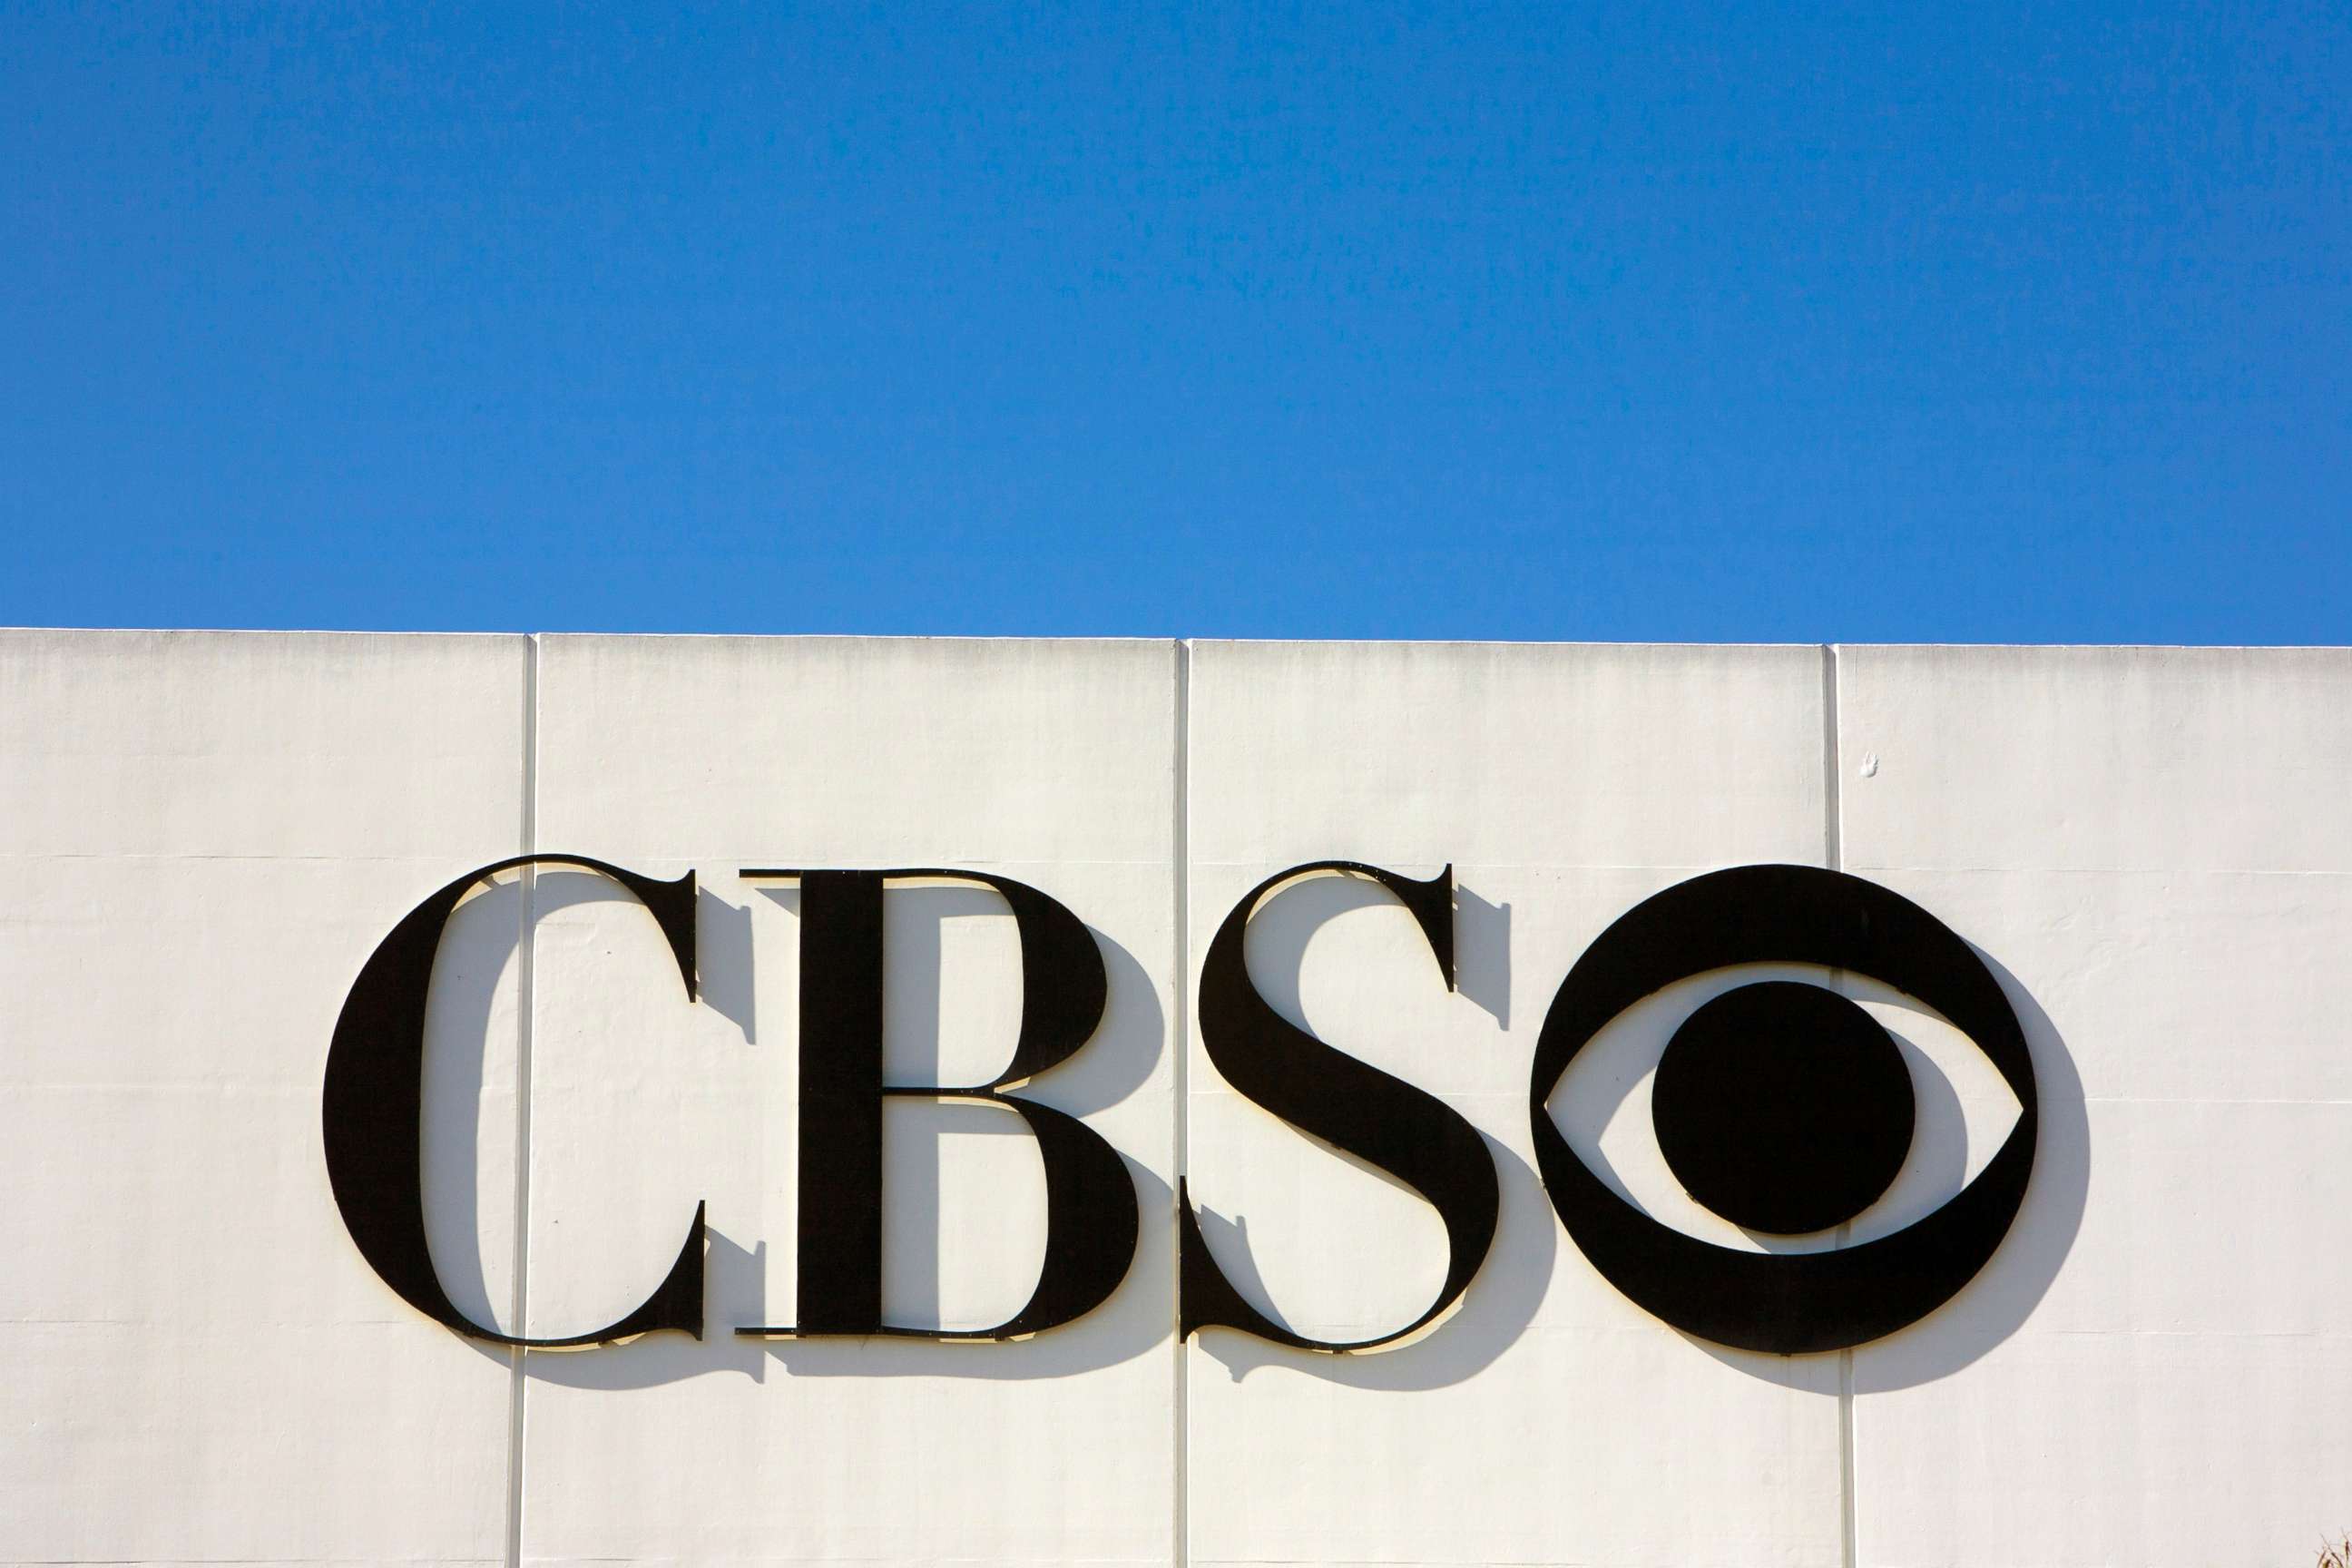 PHOTO: A large sign and logo greets visitors to CBS's Television Studios, April 26, 2012, in Los Angeles, in this file photo.